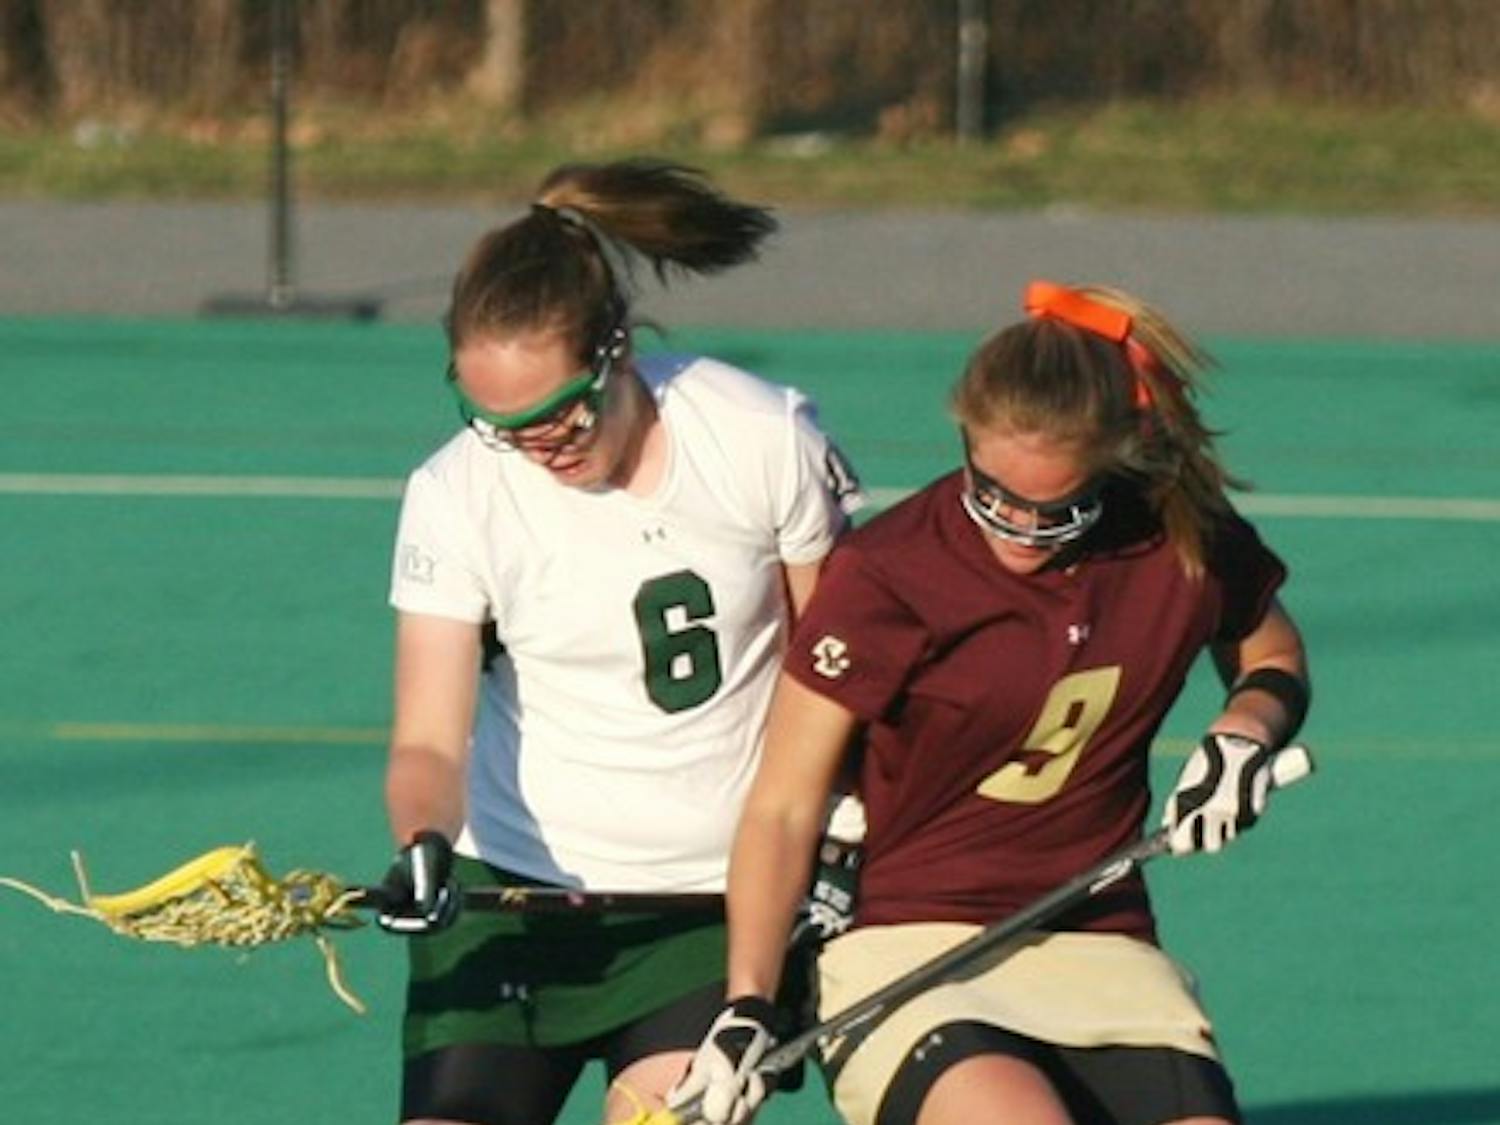 Colleen Olsen '10 battles for a ground ball in Tuesday's 13-9 victory.